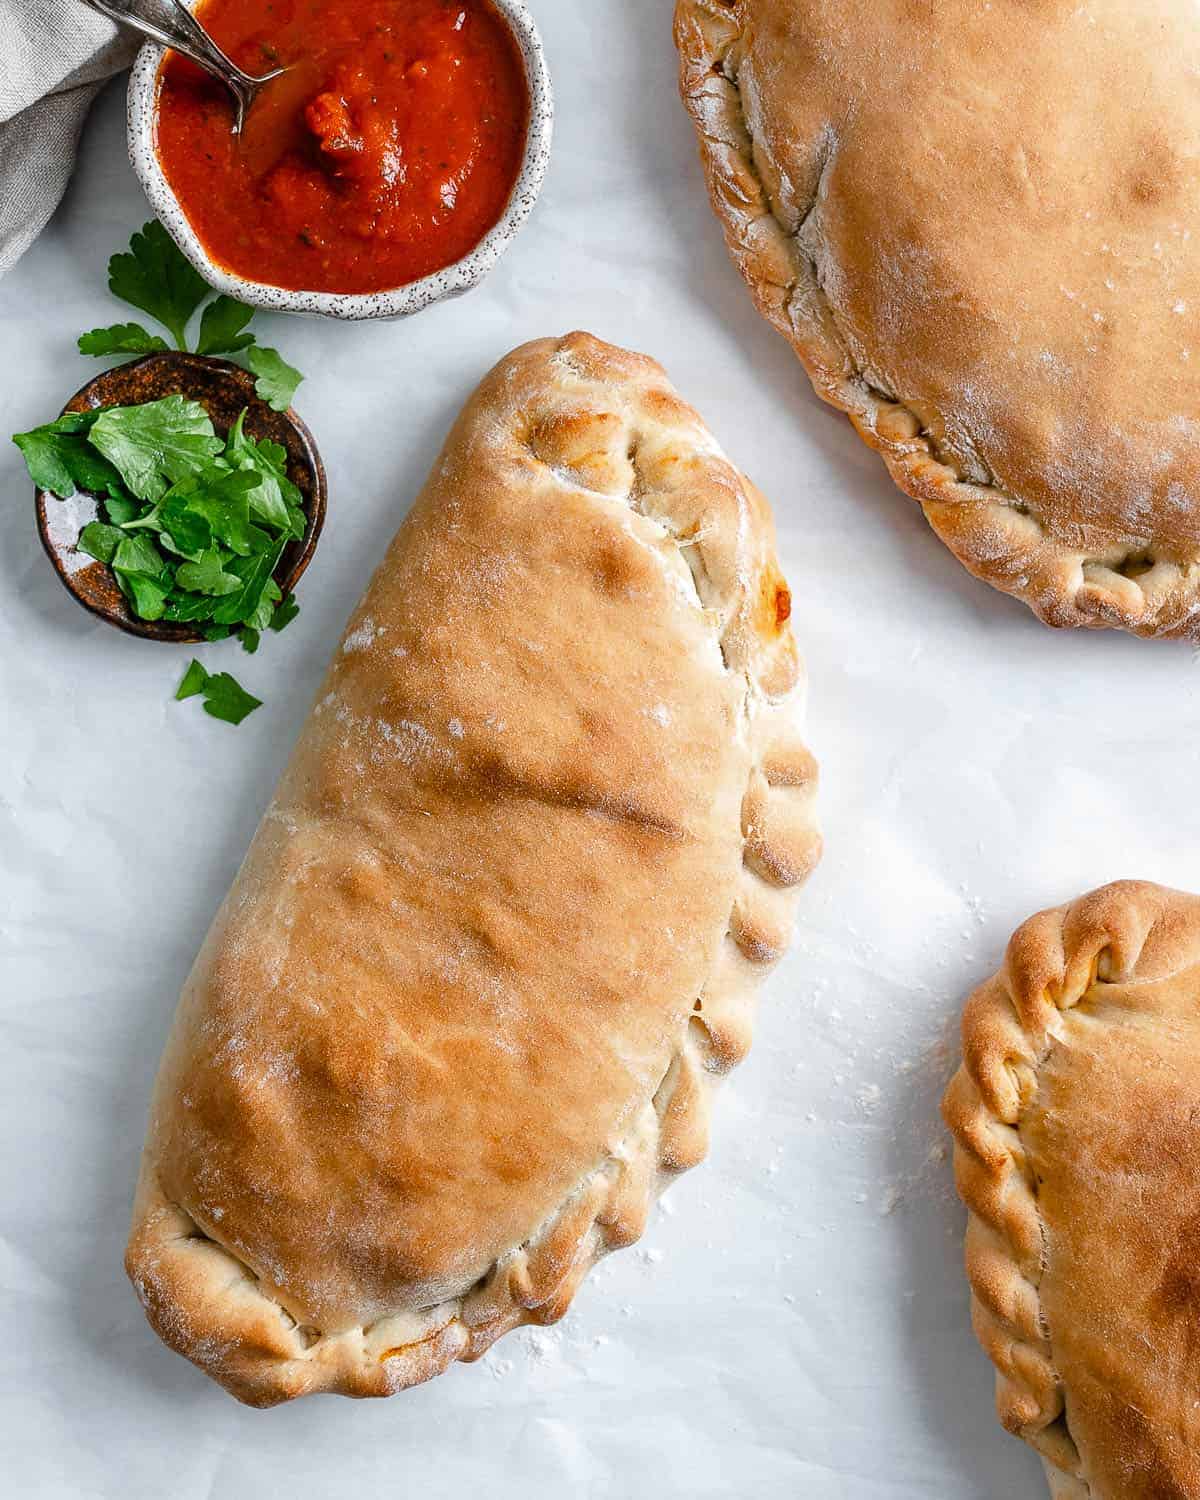 three completed completed Marinara Calzones against white surface